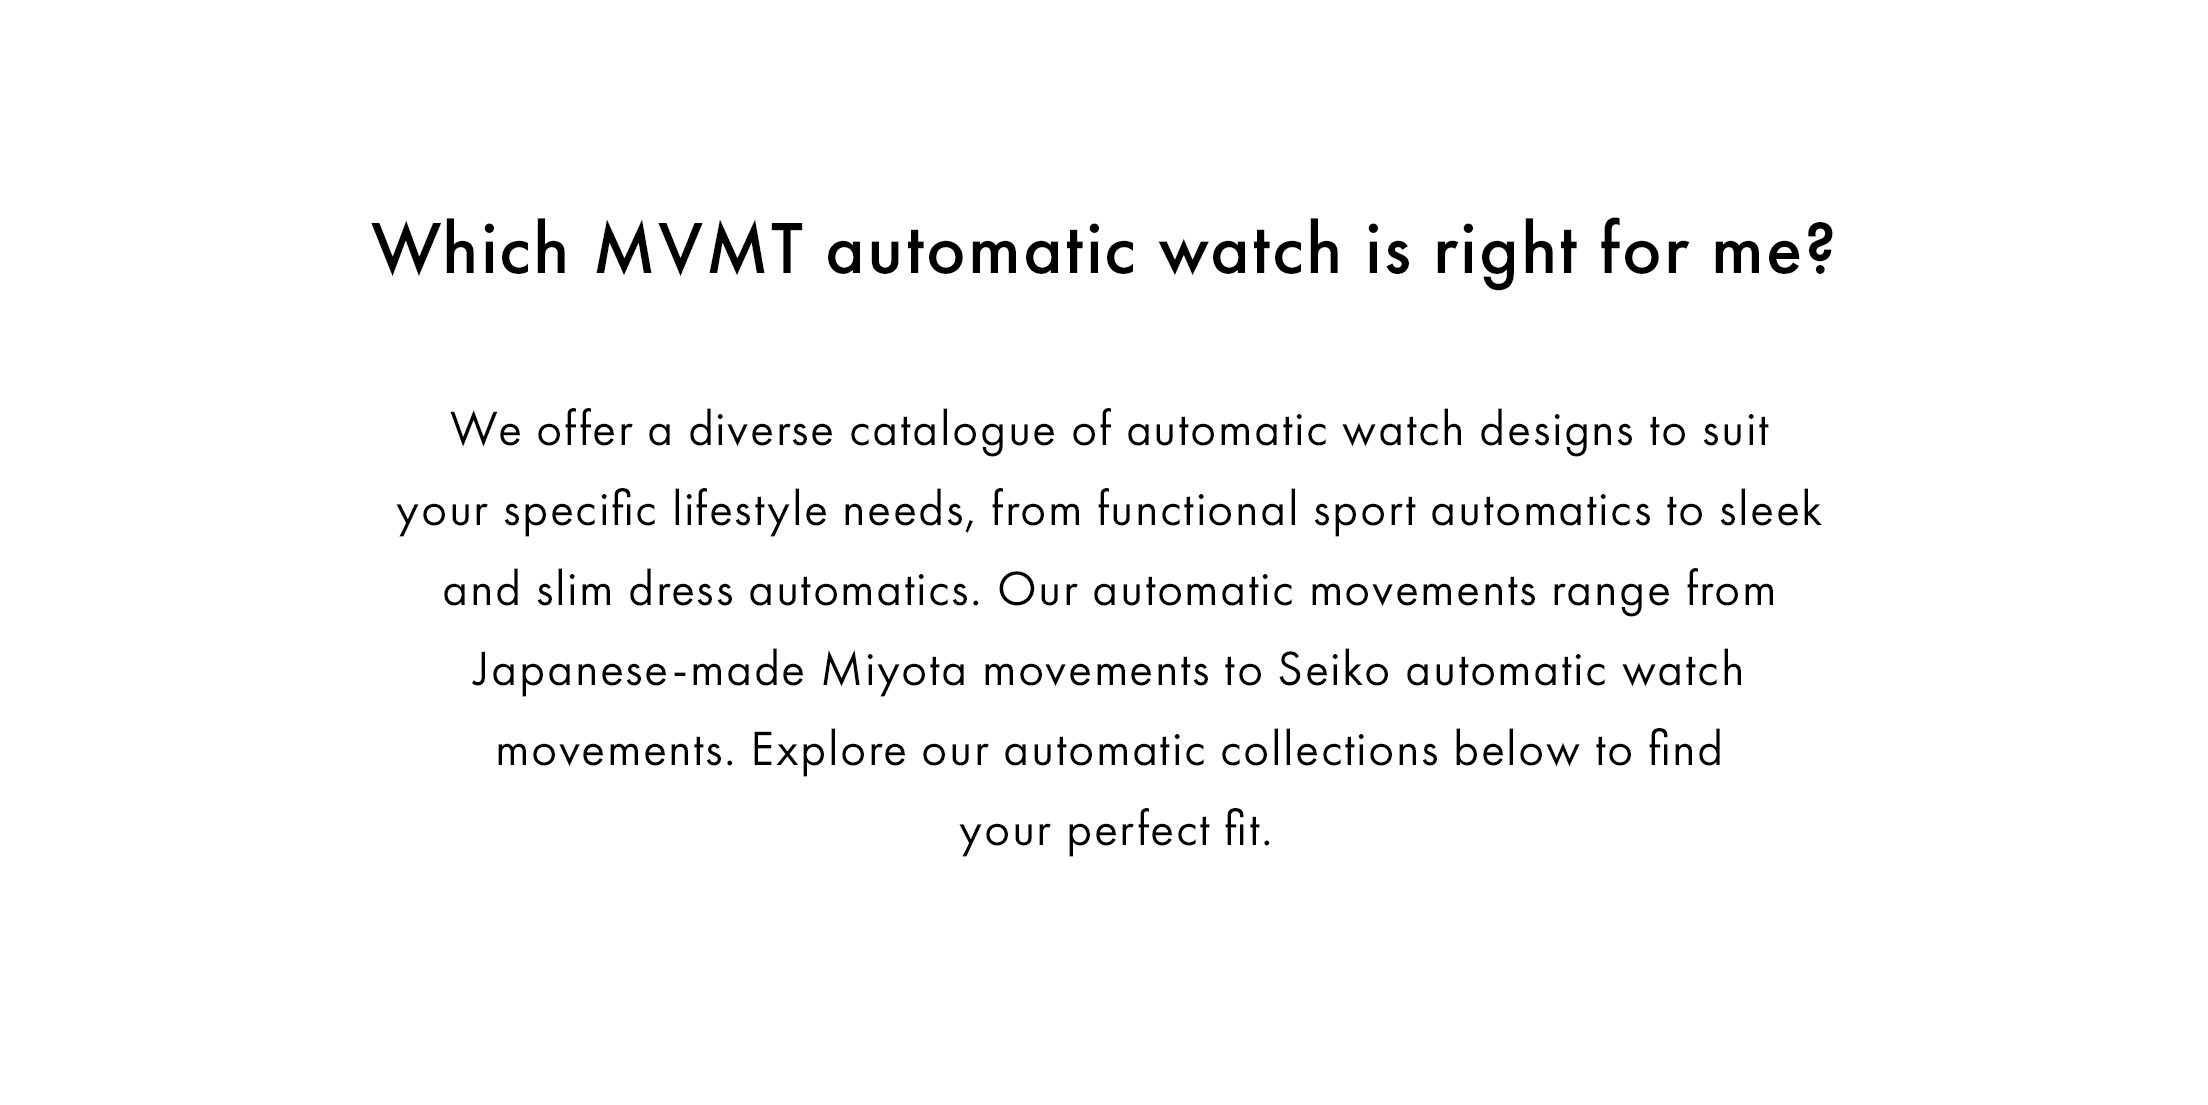 Which MVMT automatic watch is right for me?   We offer a diverse catalogue of automatic watch designs to suit your specific lifestyle needs, from functional sport automatics to sleek and slim dress automatics. Our automatic movements range from Japanese-made Miyota movements to Seiko automatic watch movements. Explore our automatic collections below to find your perfect fit.